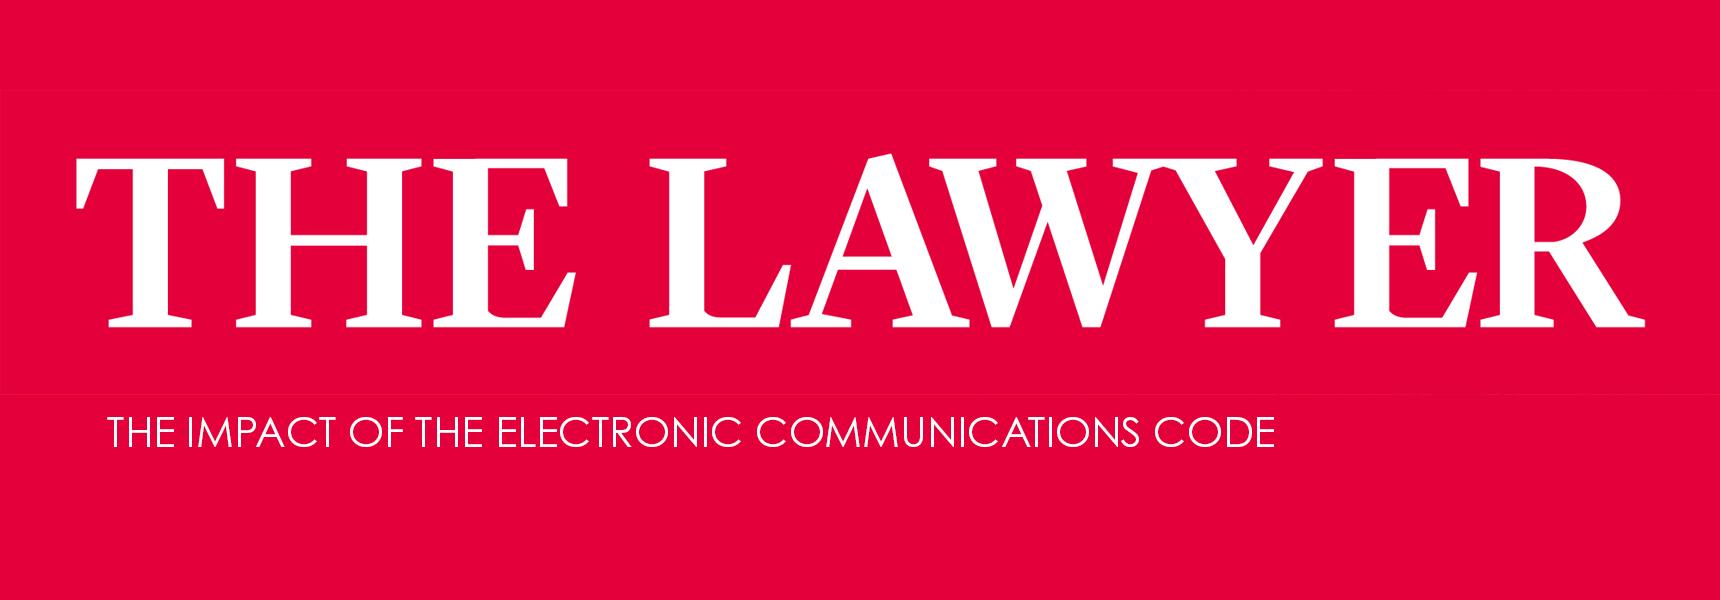 Carlos Pierce discusses the impact of the Electronic Communications Code